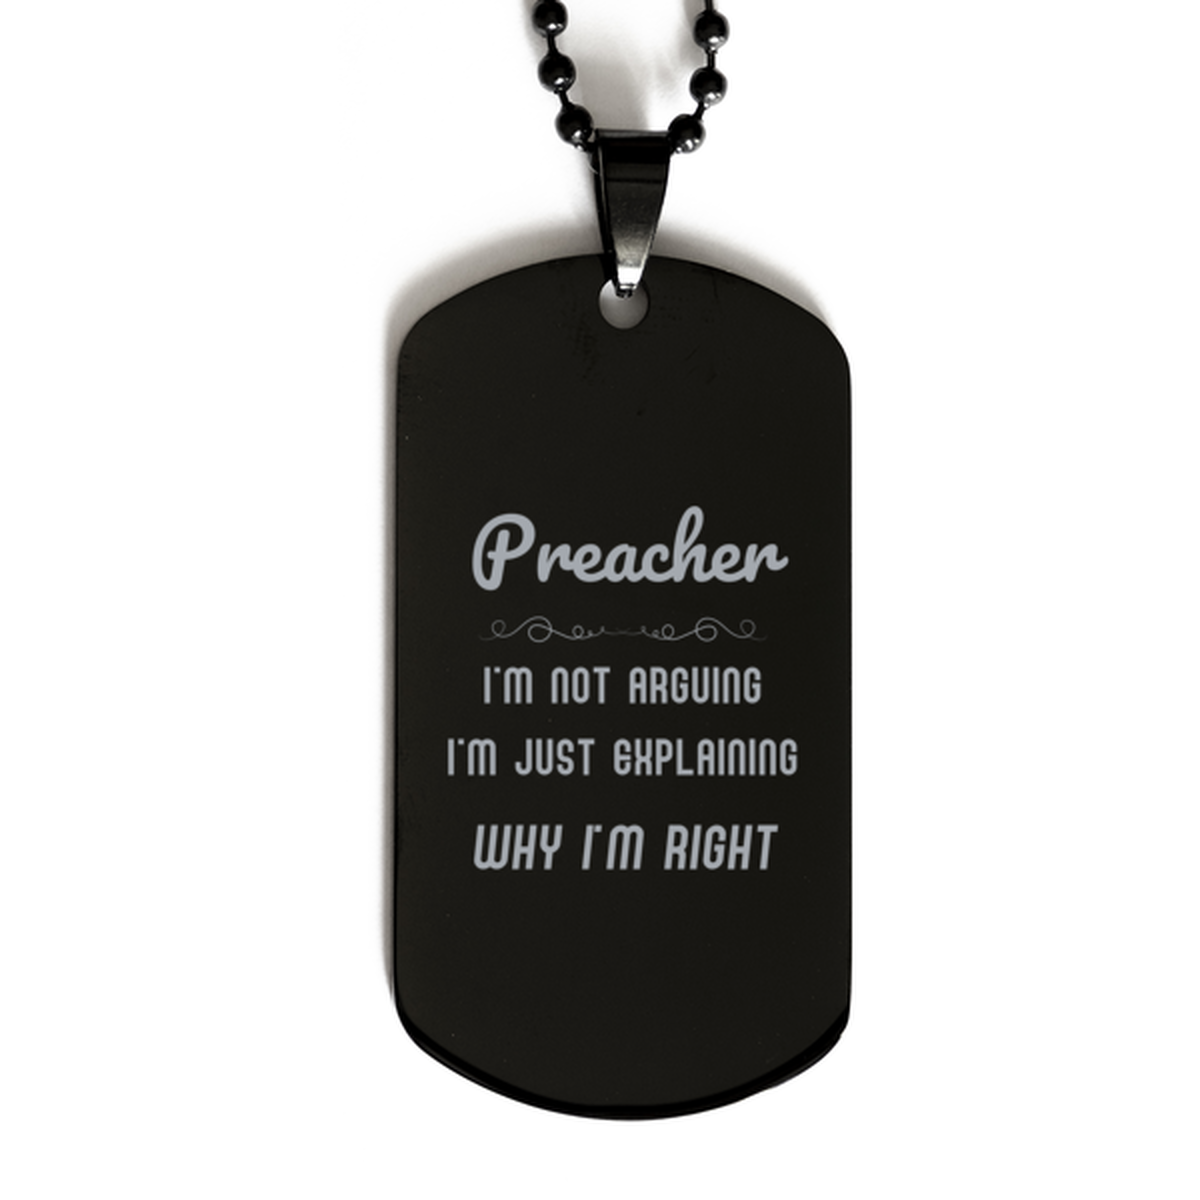 Preacher I'm not Arguing. I'm Just Explaining Why I'm RIGHT Black Dog Tag, Funny Saying Quote Preacher Gifts For Preacher Graduation Birthday Christmas Gifts for Men Women Coworker